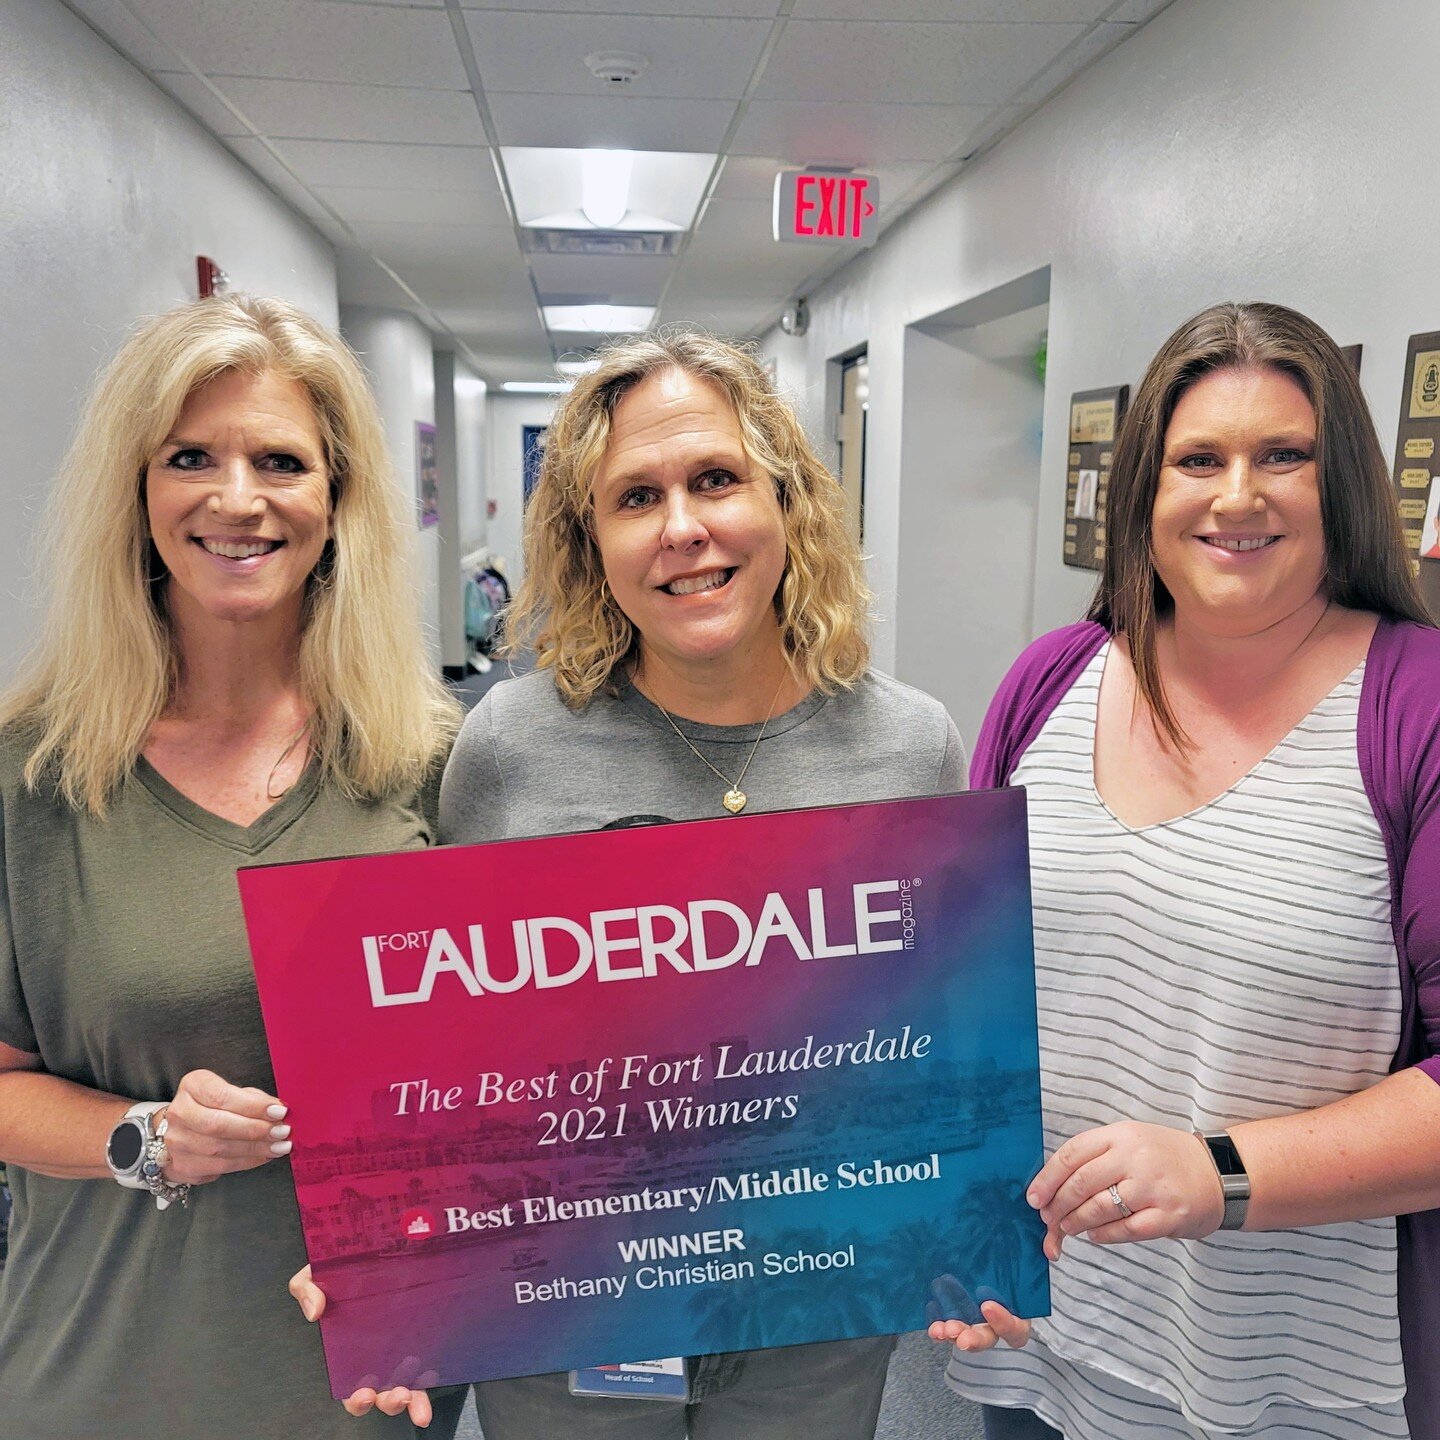 CONGRATS BCS BOBCATS! VOTED BEST OF FT. LAUDERDALE IN 2021

Fort Lauderdale Magazine lists its annual &quot;Best Of Fort Lauderdale&quot; businesses every year. Bethany won Runner-Up for Best Elementary/Middle School in 2020. This year, BCS WON BEST 